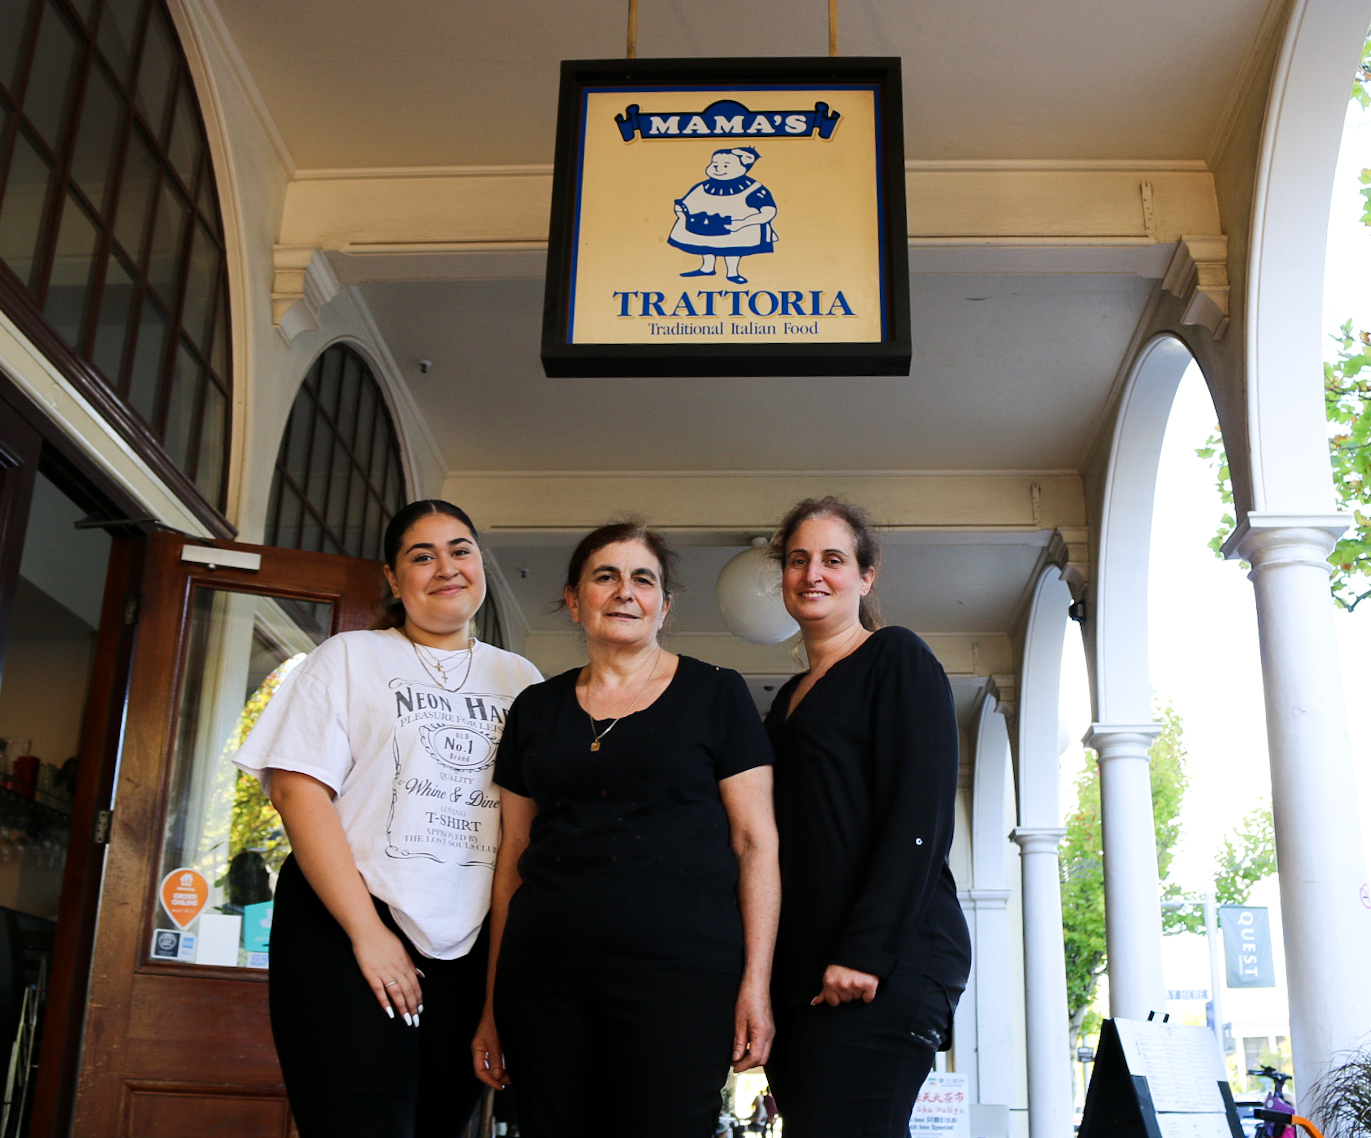 The Institutions: Three generations have kept Mama’s Trattoria in the same family for almost 20 years